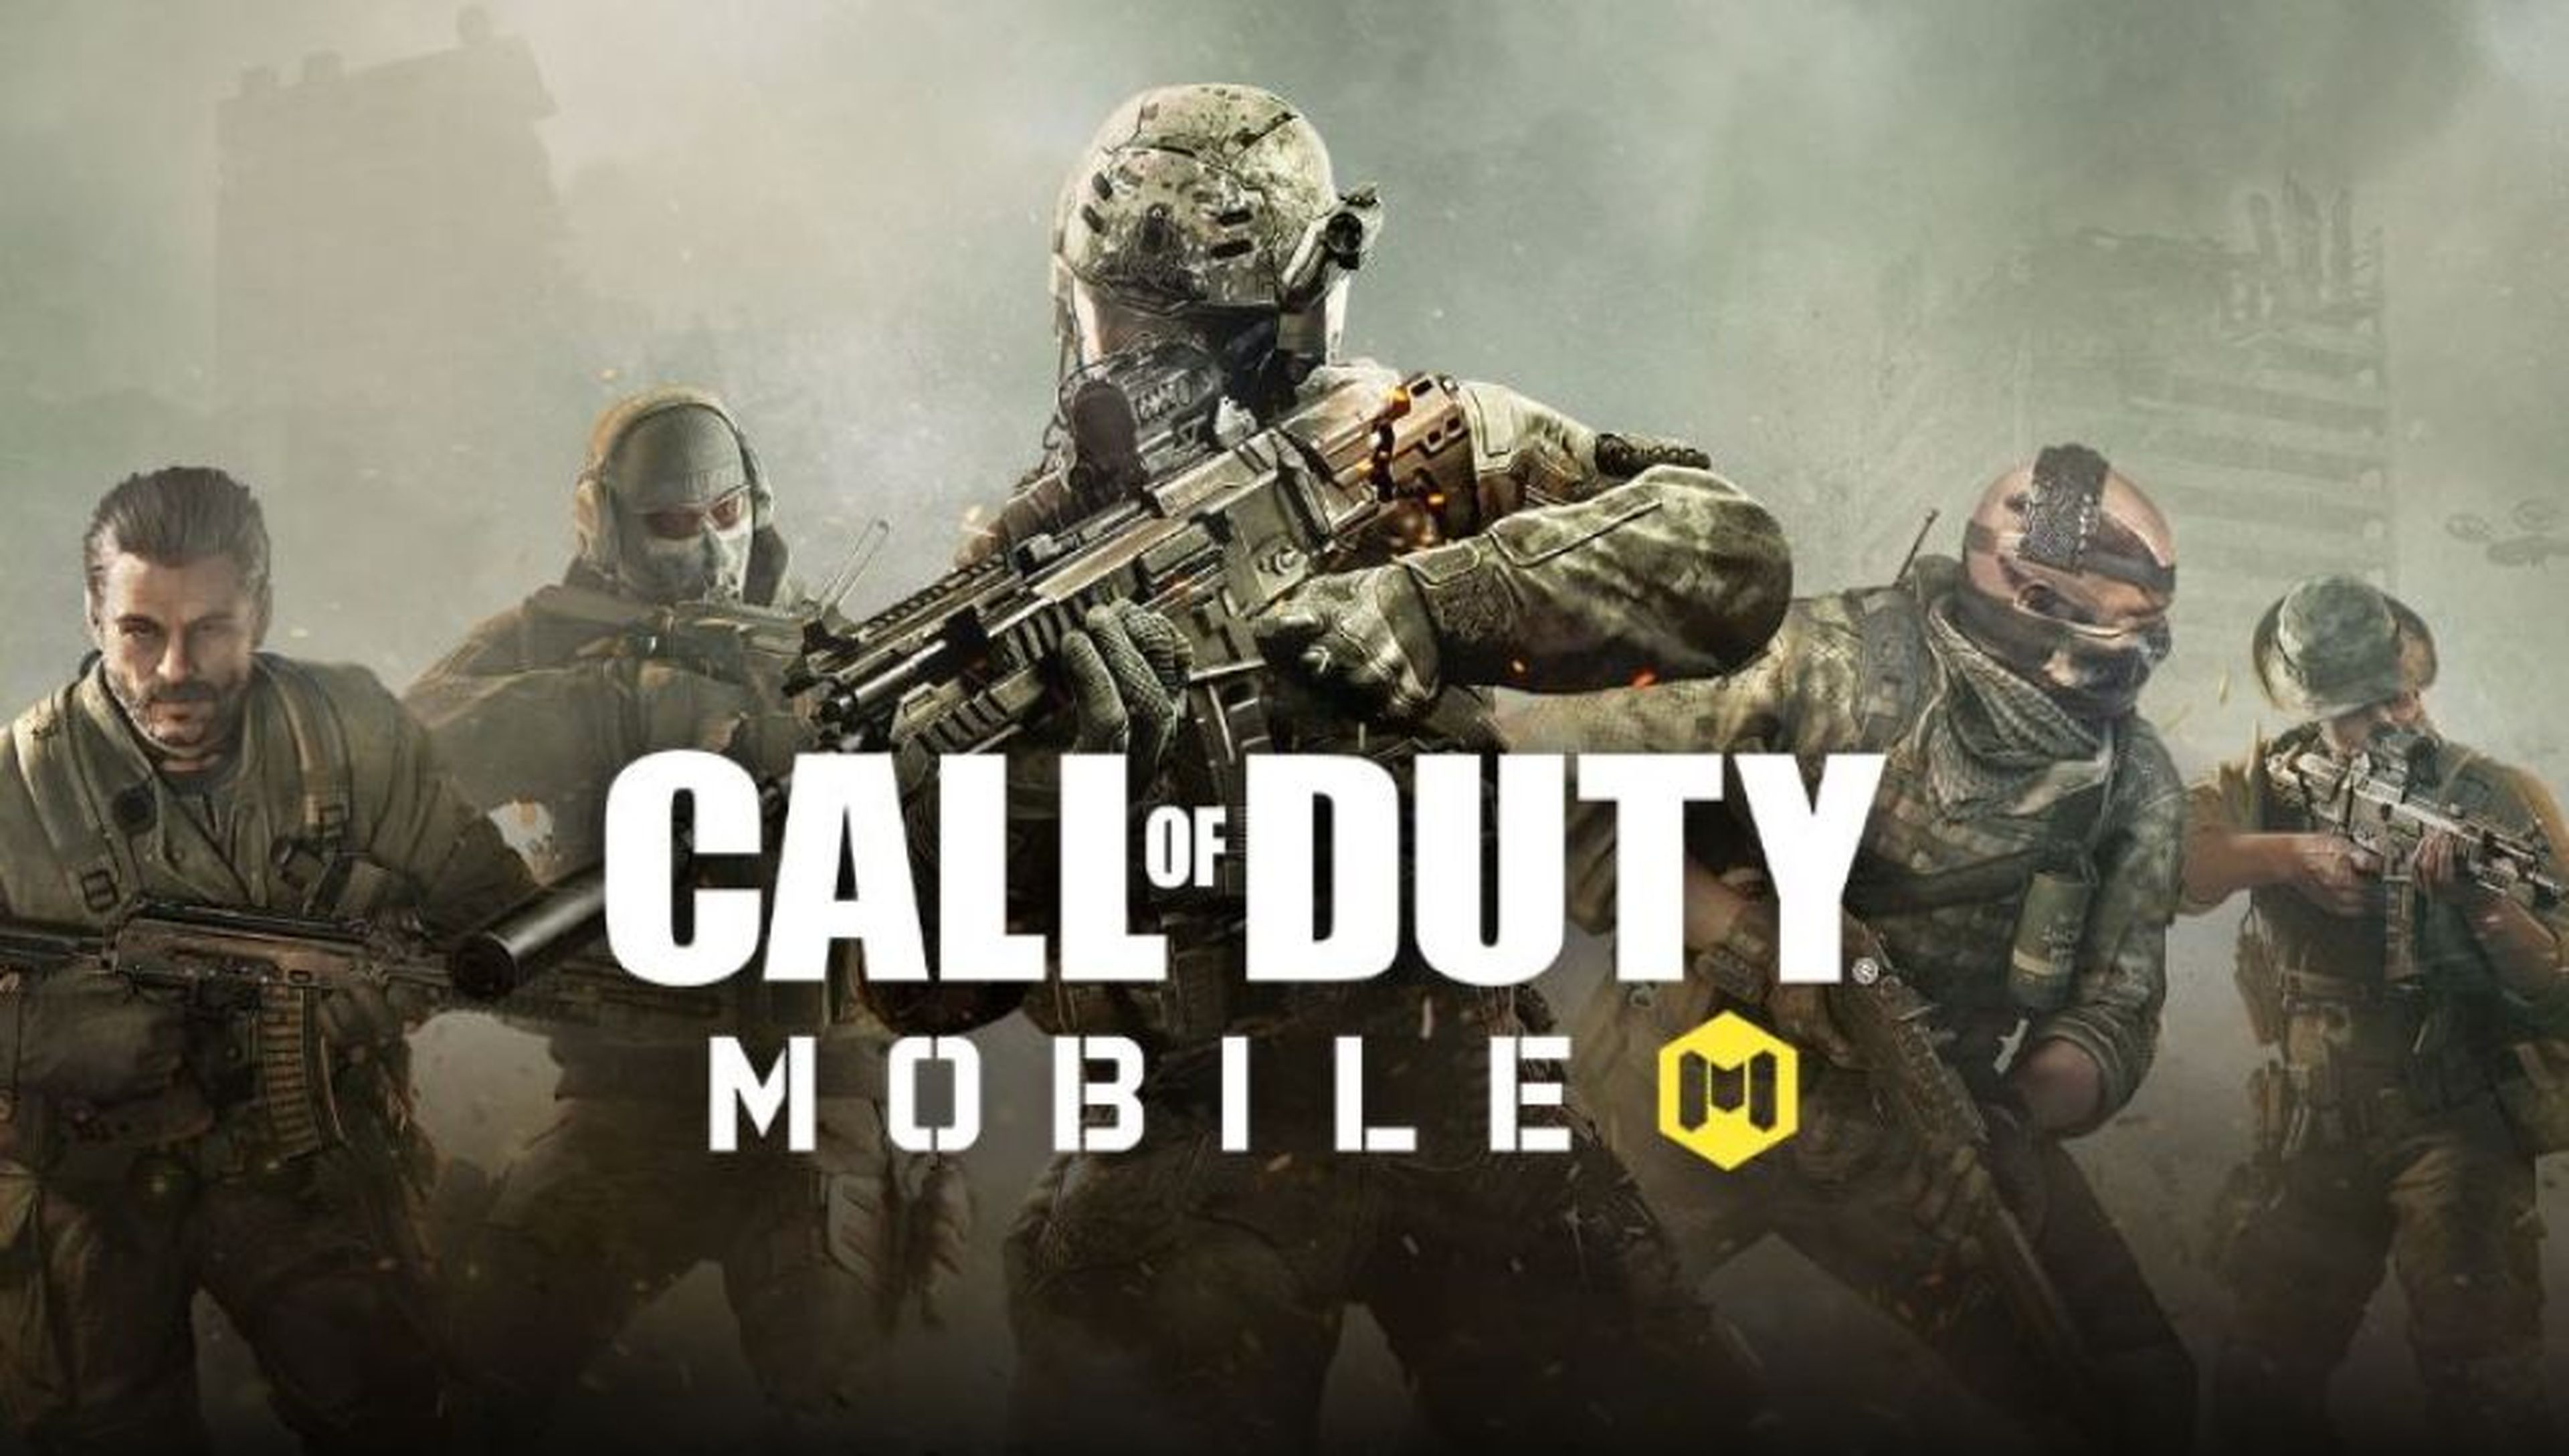 COD Mobile Season 10 APK And OBB Download Links (2023)